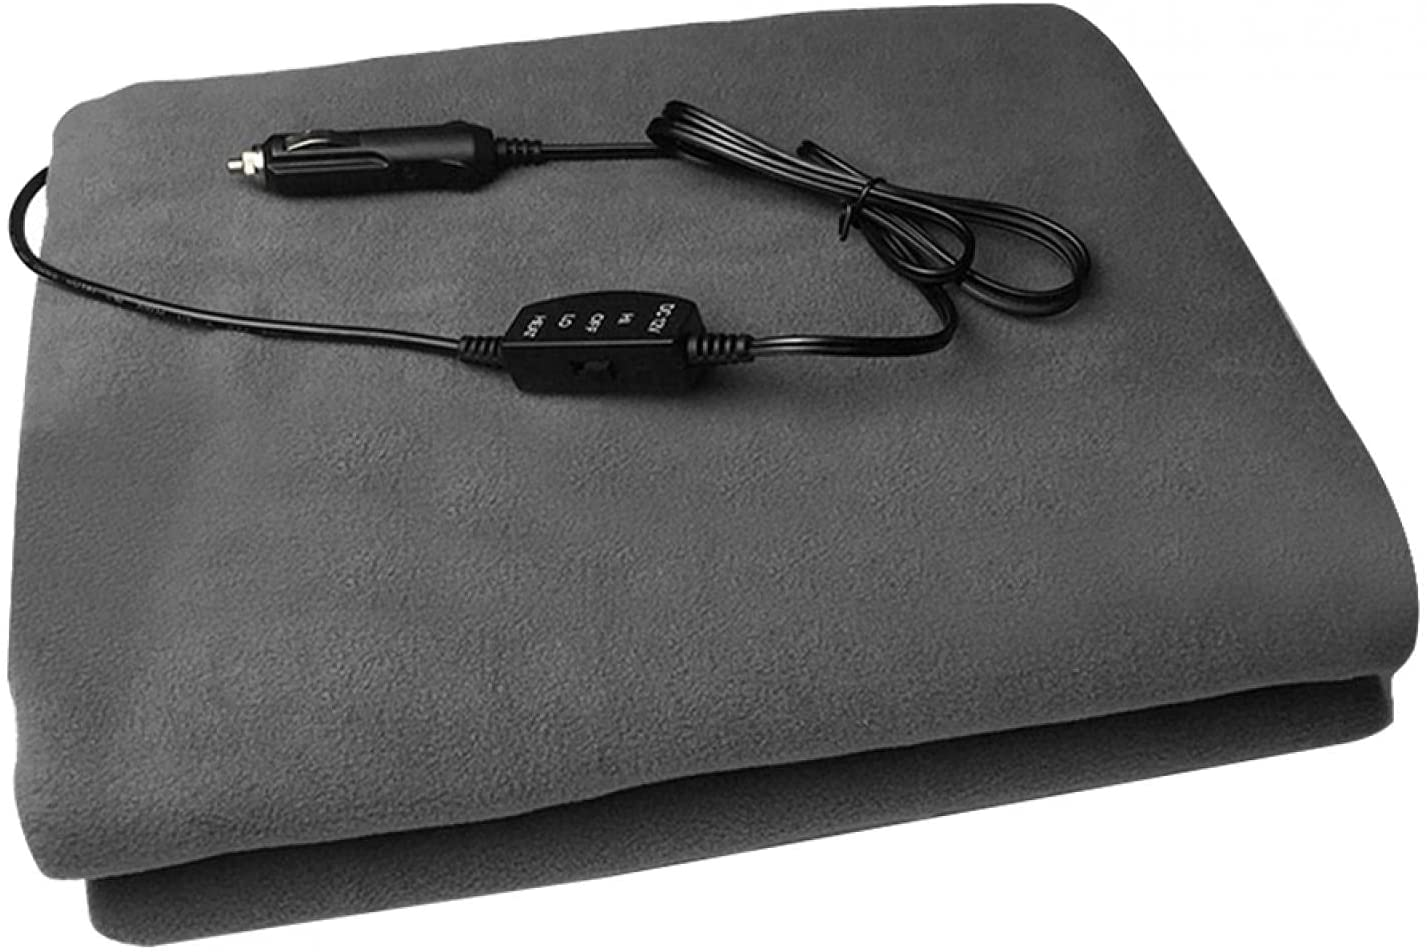 Electric Blanket 57" X 39" Super Soft Heated Blanket Machine Washable Car Heating Blanket Artificial Fleece Electric Blanket Throw with 2 Heating Settings for Home Office Camping Travel Use